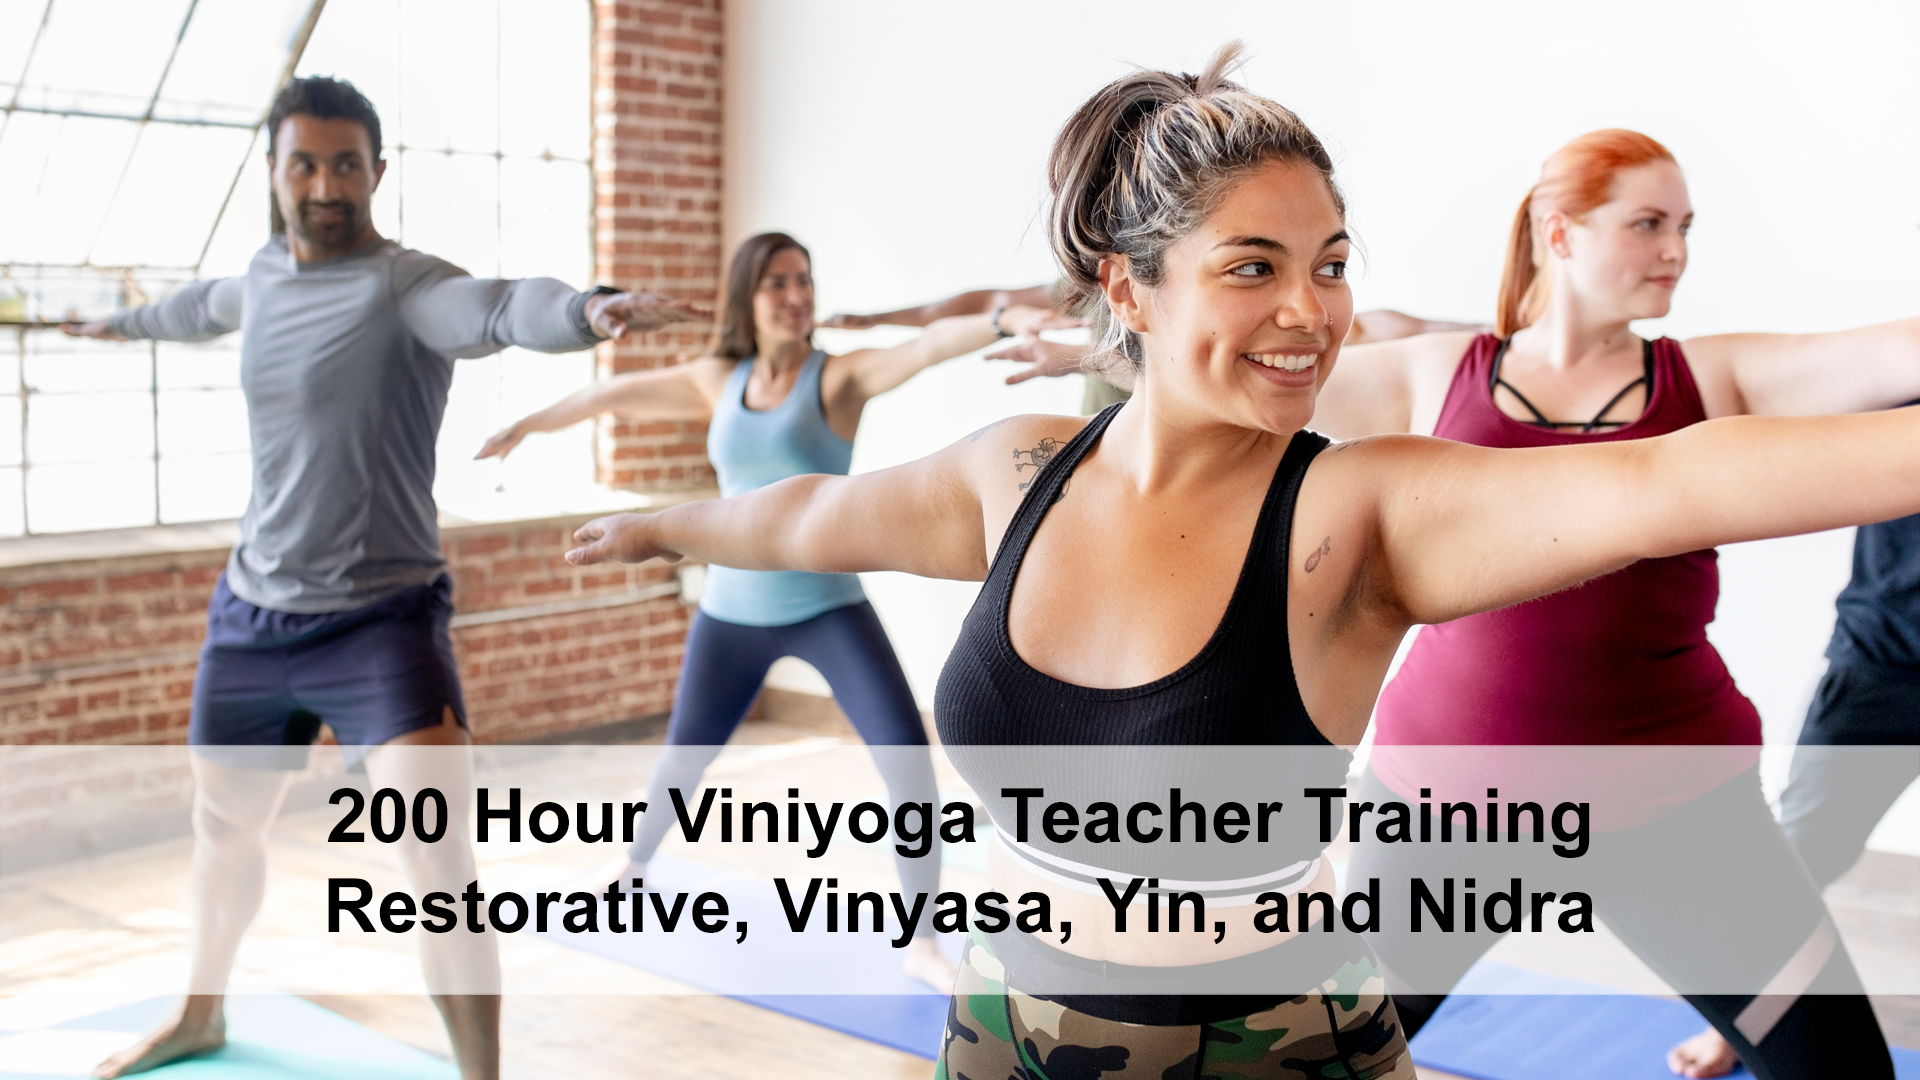 A variety of people doing yoga in 200 Hour Viniyoga training